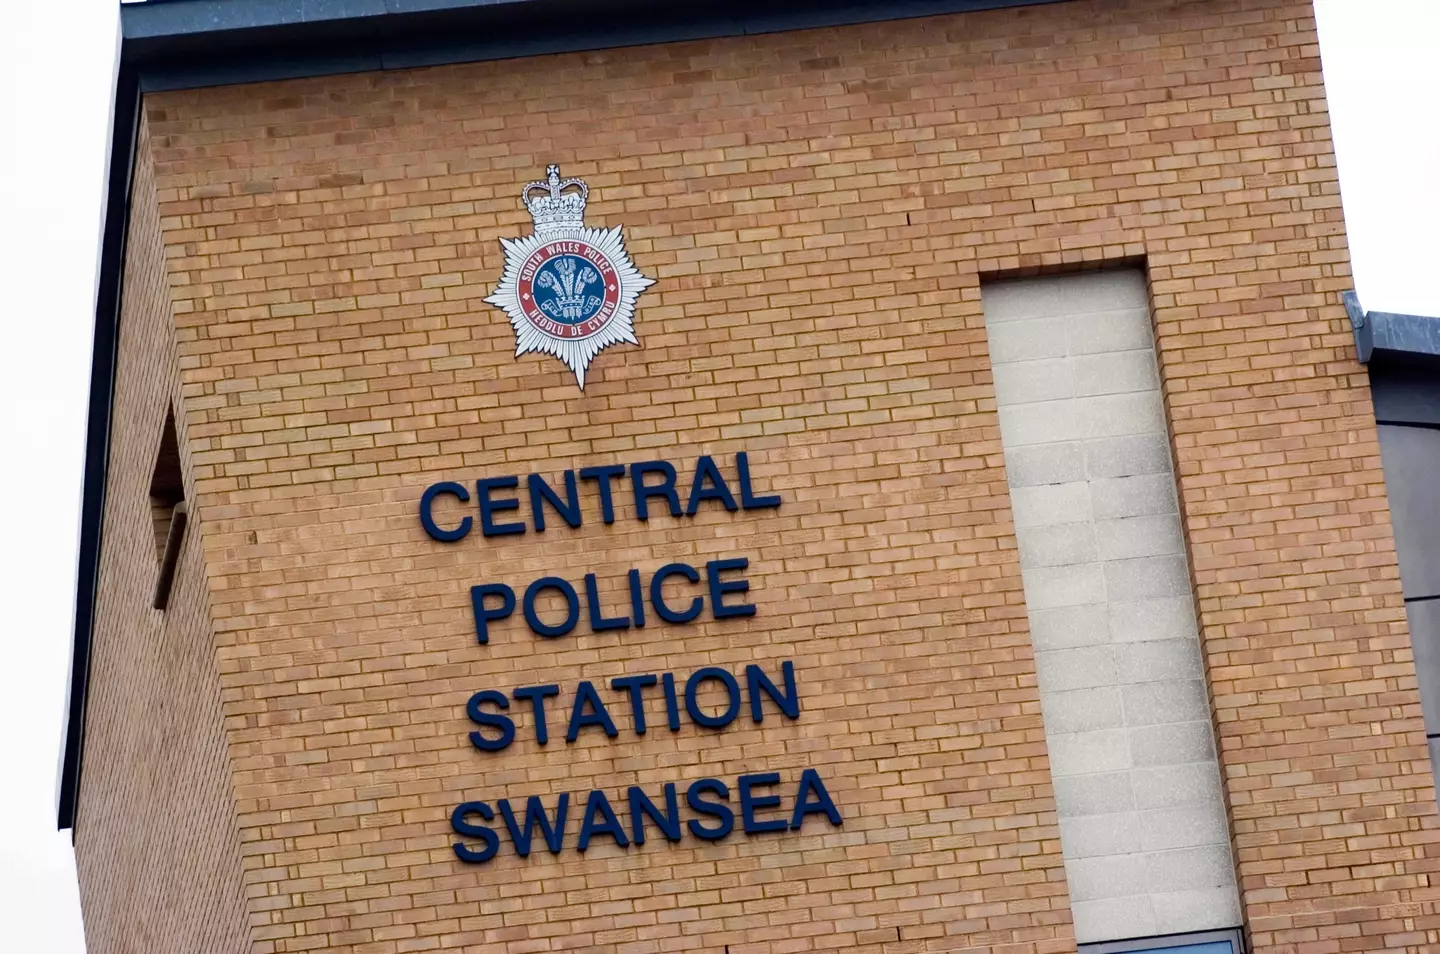 Hampson has repeatedly returned to the same spot near Swansea Central Police Station.